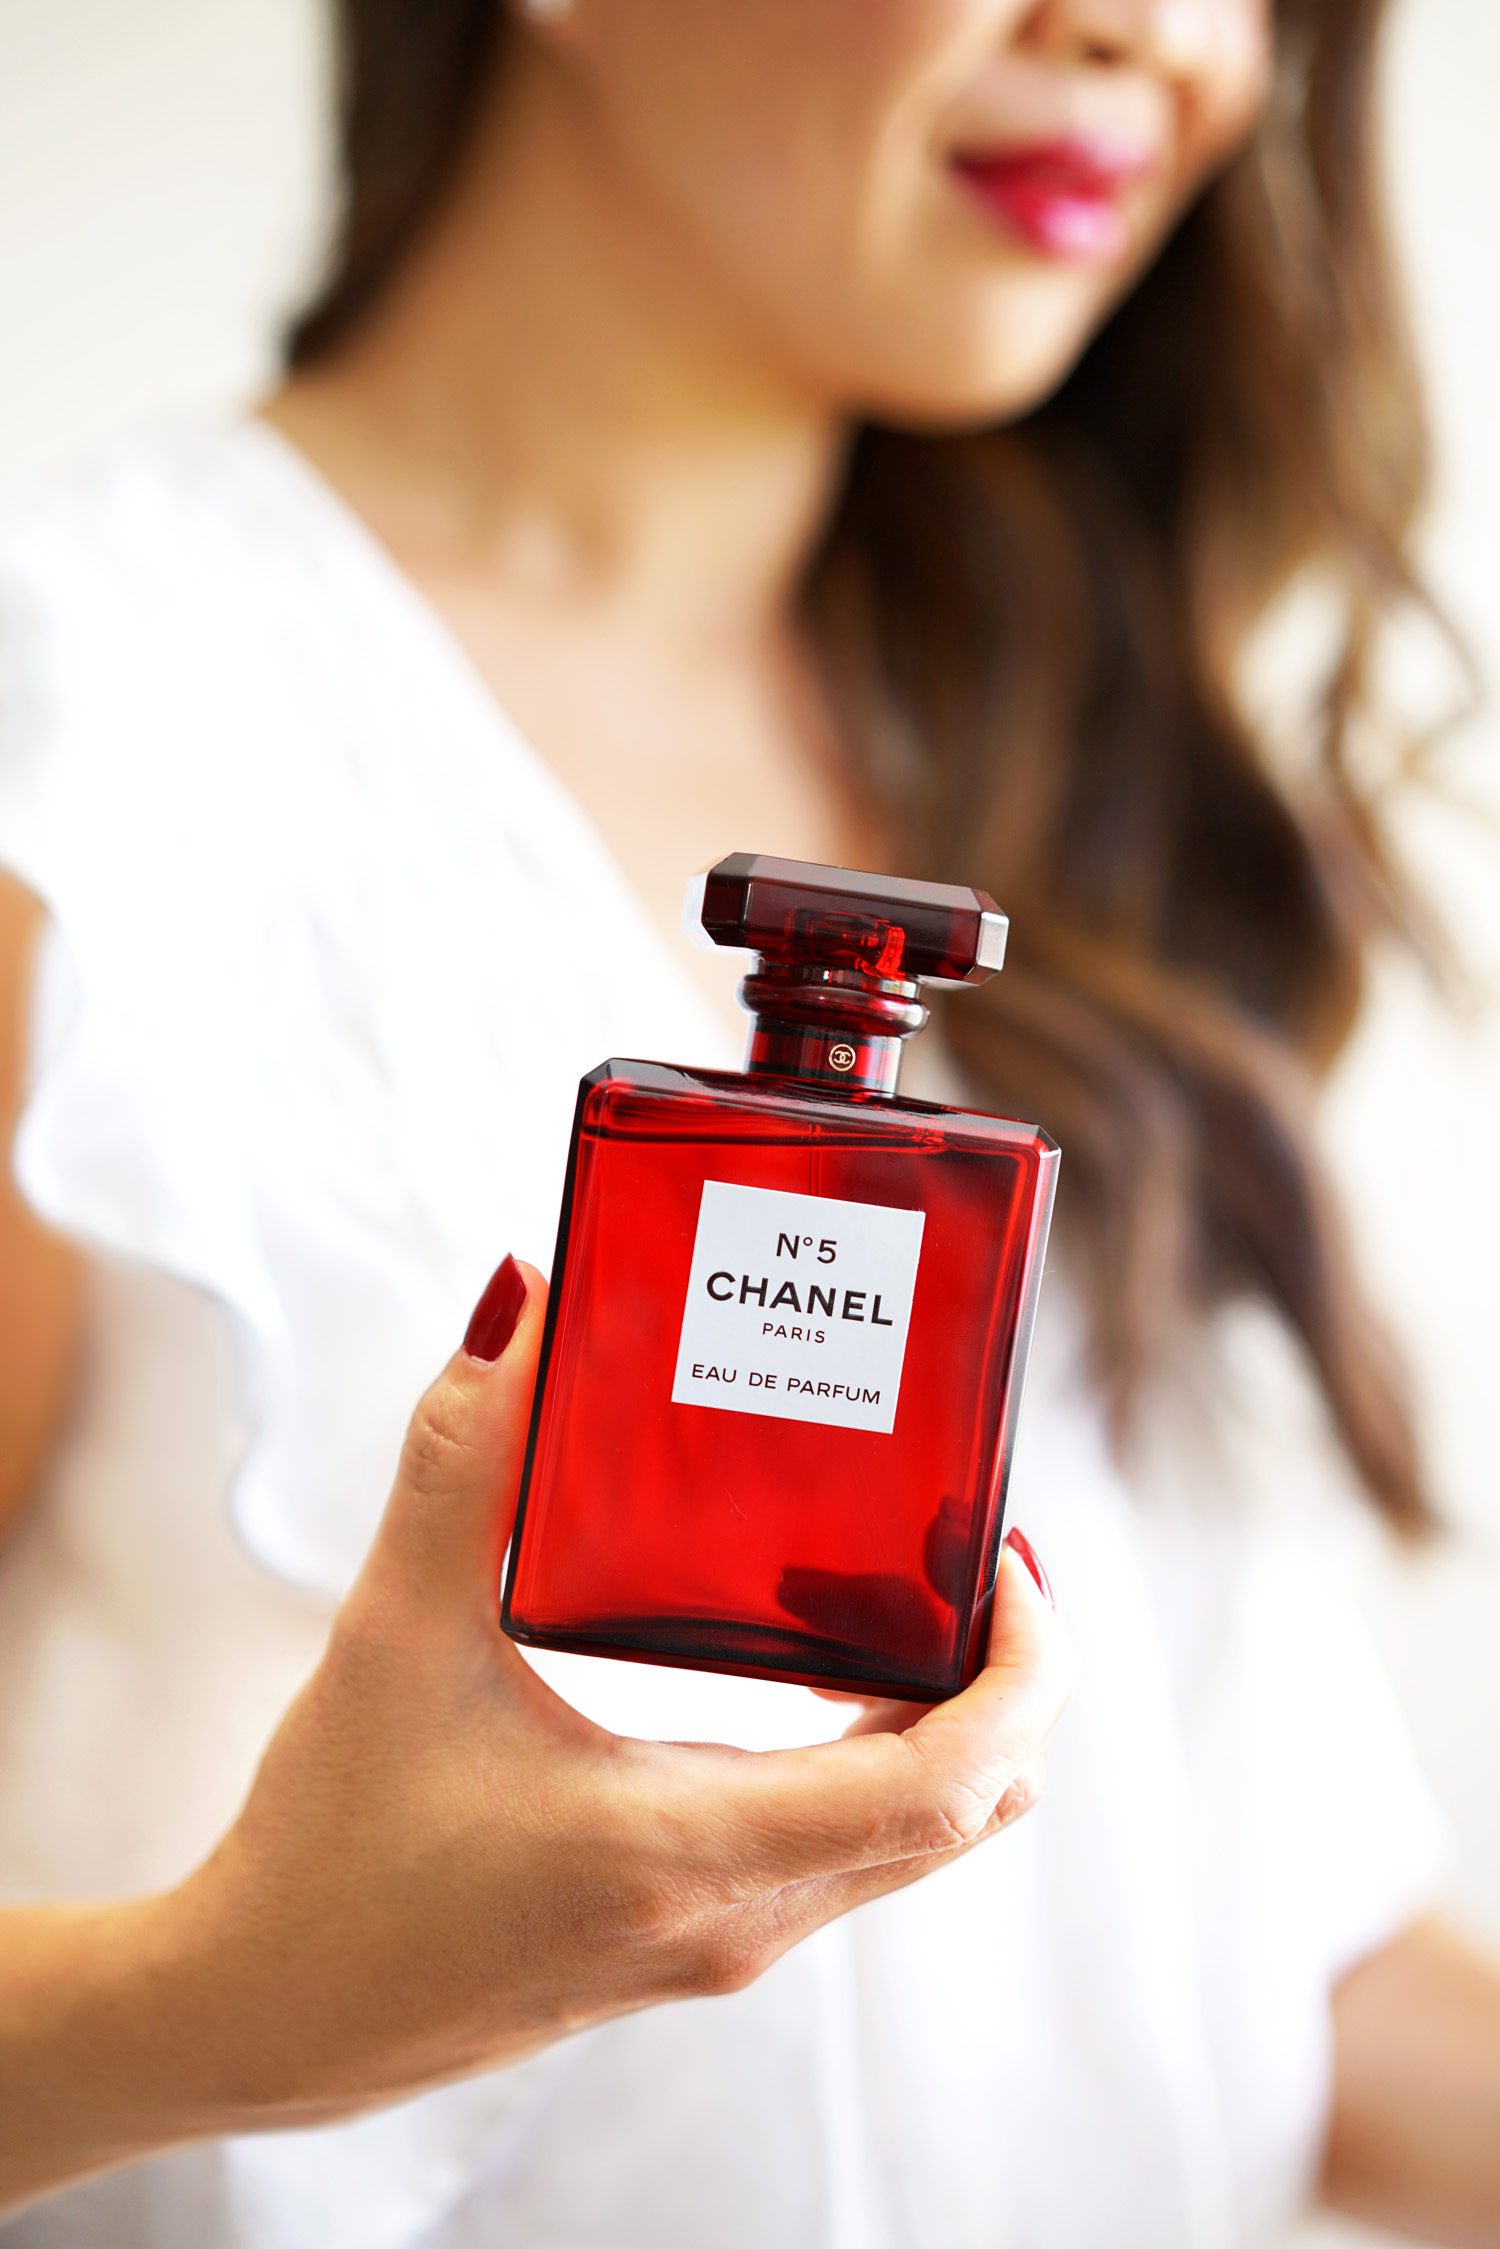 chanel number 5 100ml